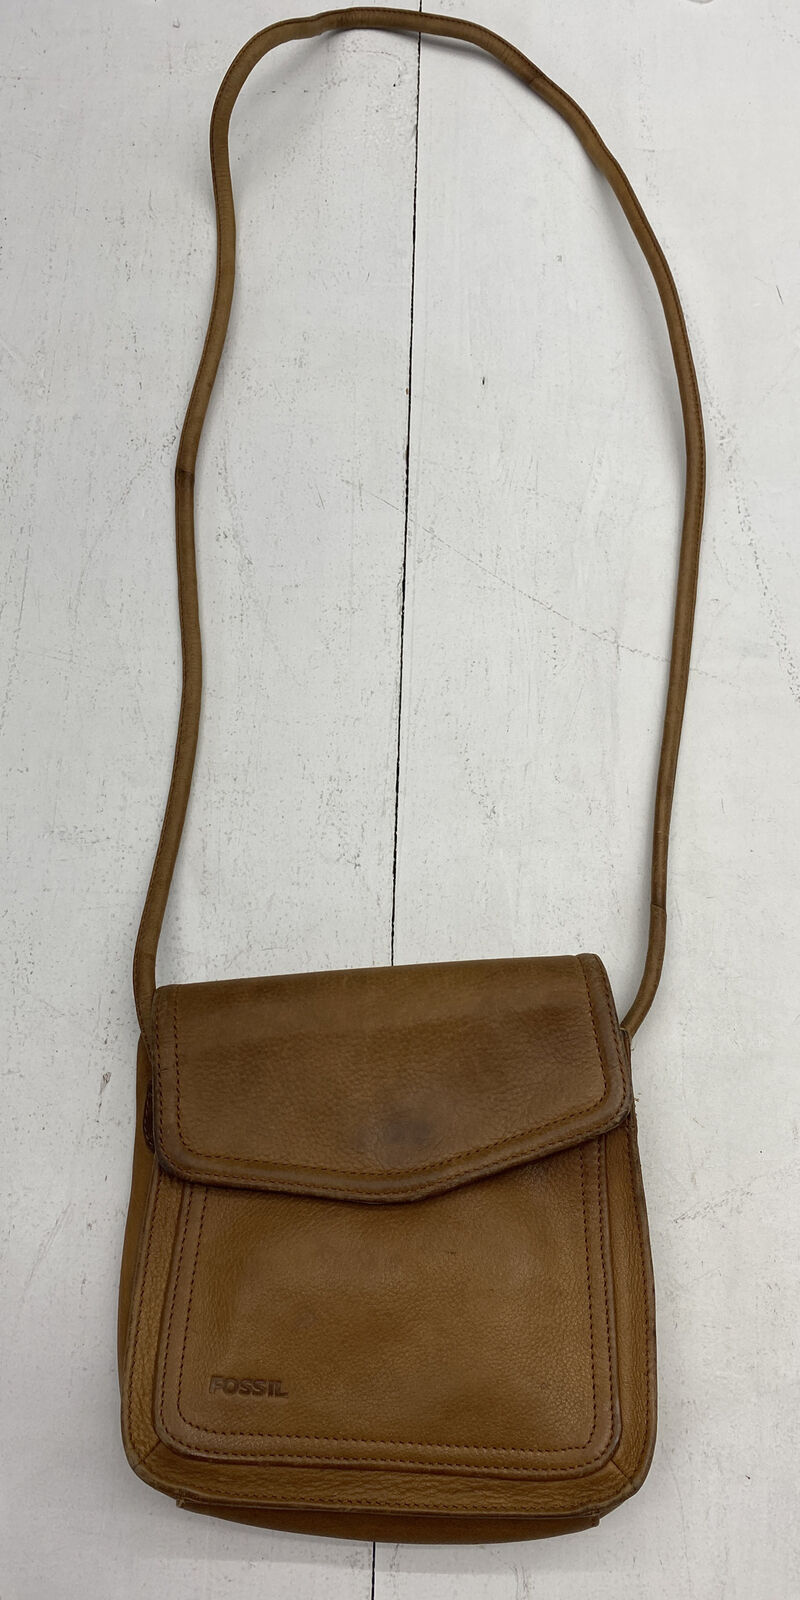 Vintage Fossil Brown Leather Small Crossbody Shoulder Bag Purse